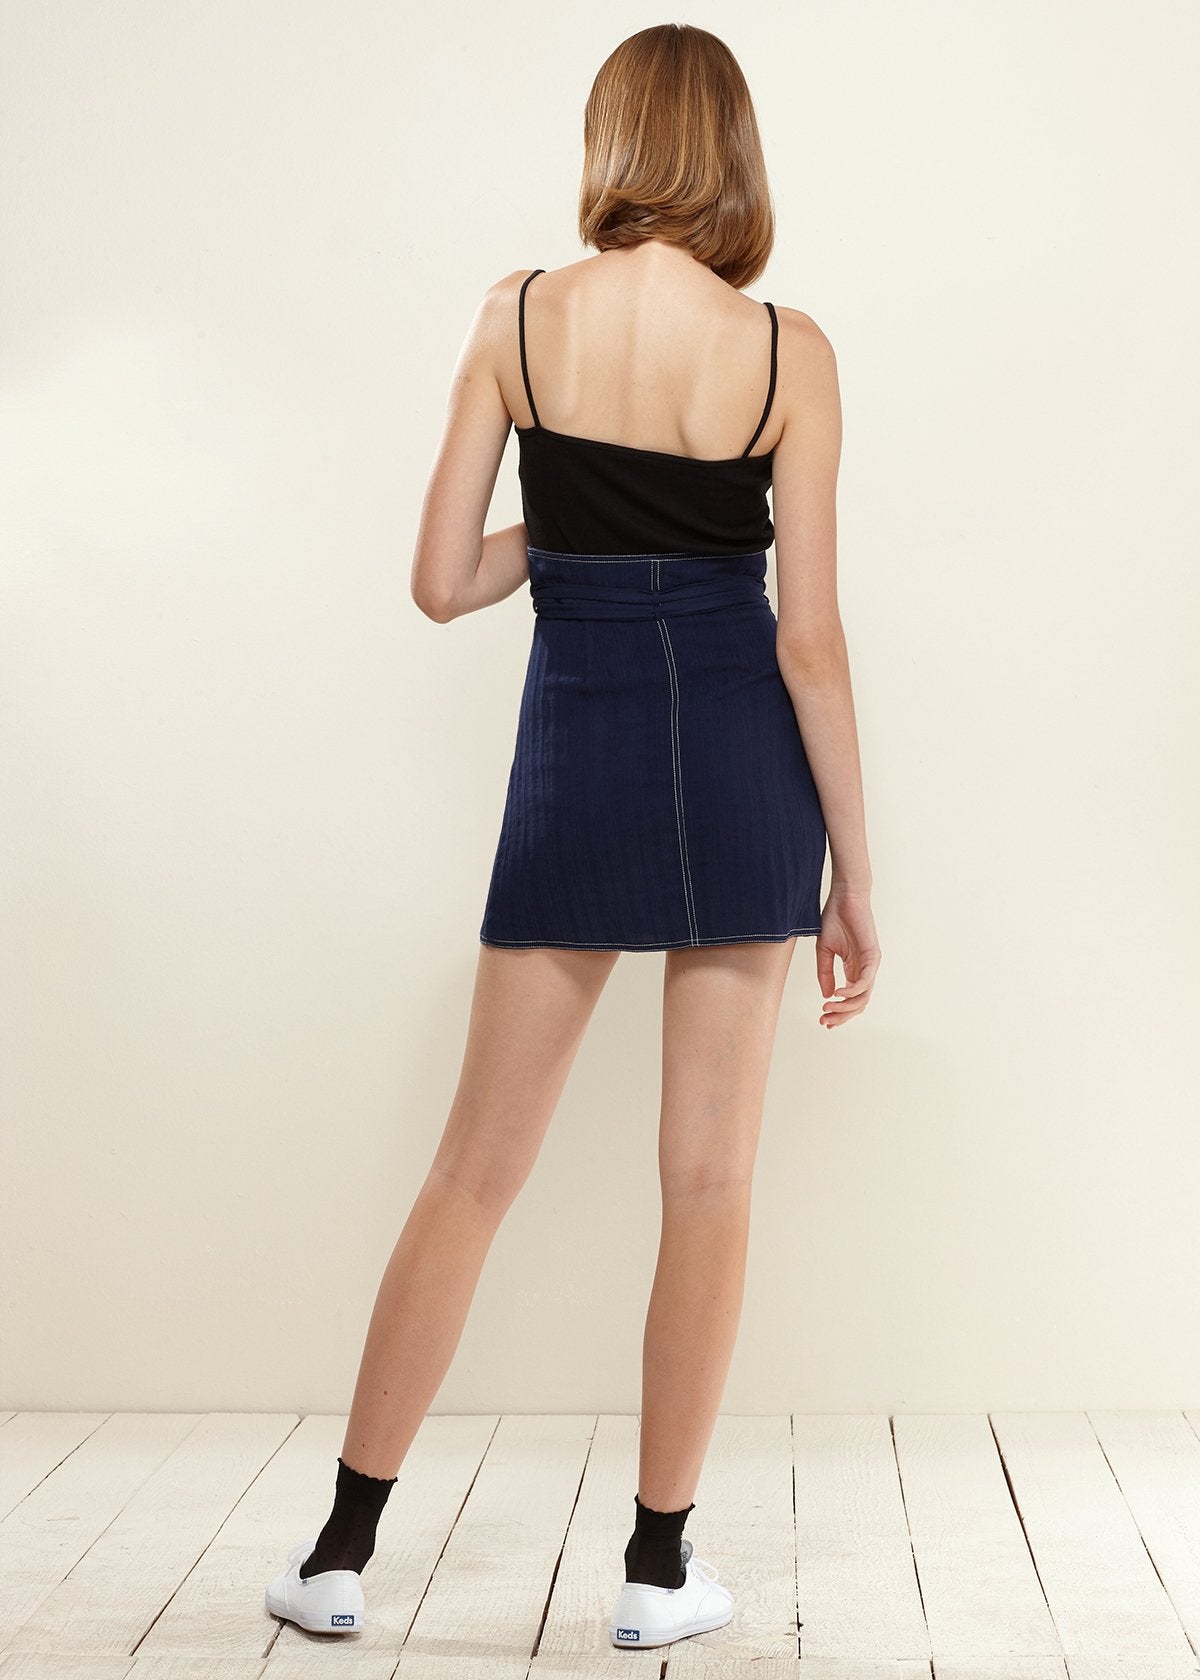 Stitch High Waist Skirt' showcasing a skirt with a high-waisted design and stitch detailing, offering a stylish and flattering addition to your outfit.